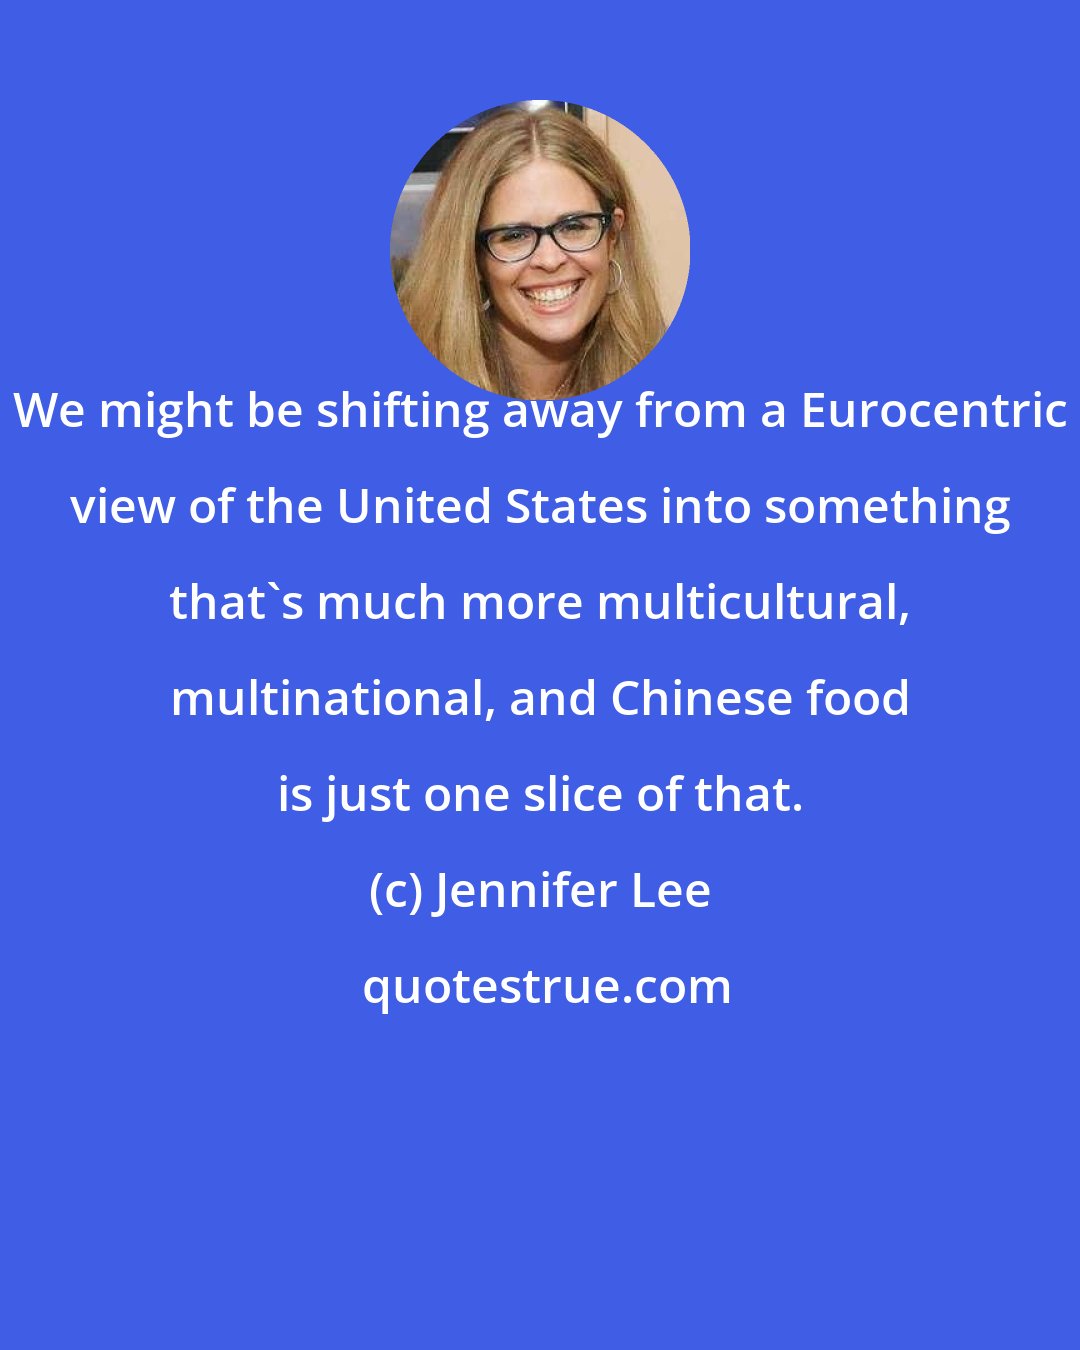 Jennifer Lee: We might be shifting away from a Eurocentric view of the United States into something that's much more multicultural, multinational, and Chinese food is just one slice of that.